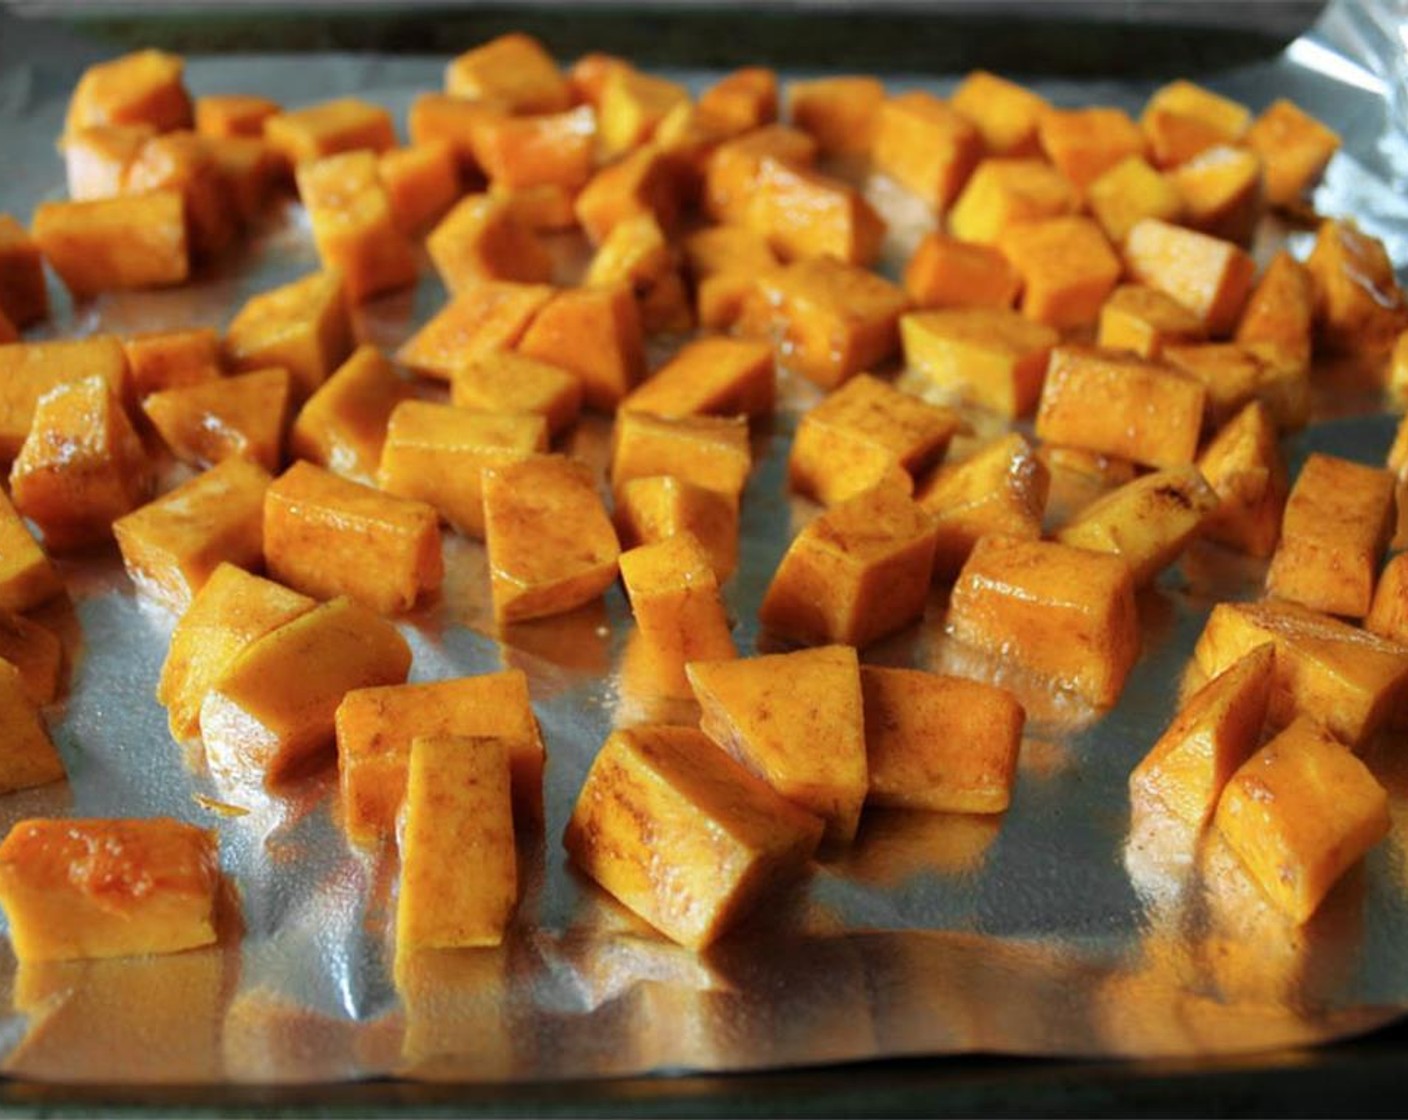 step 8 Arrange the butternut squash in a single layer on the prepared baking sheet. 20 minutes before your pork is done, transfer the butternut squash to the oven and bake for 30 minutes, turning halfway through, until the cubes are very tender.